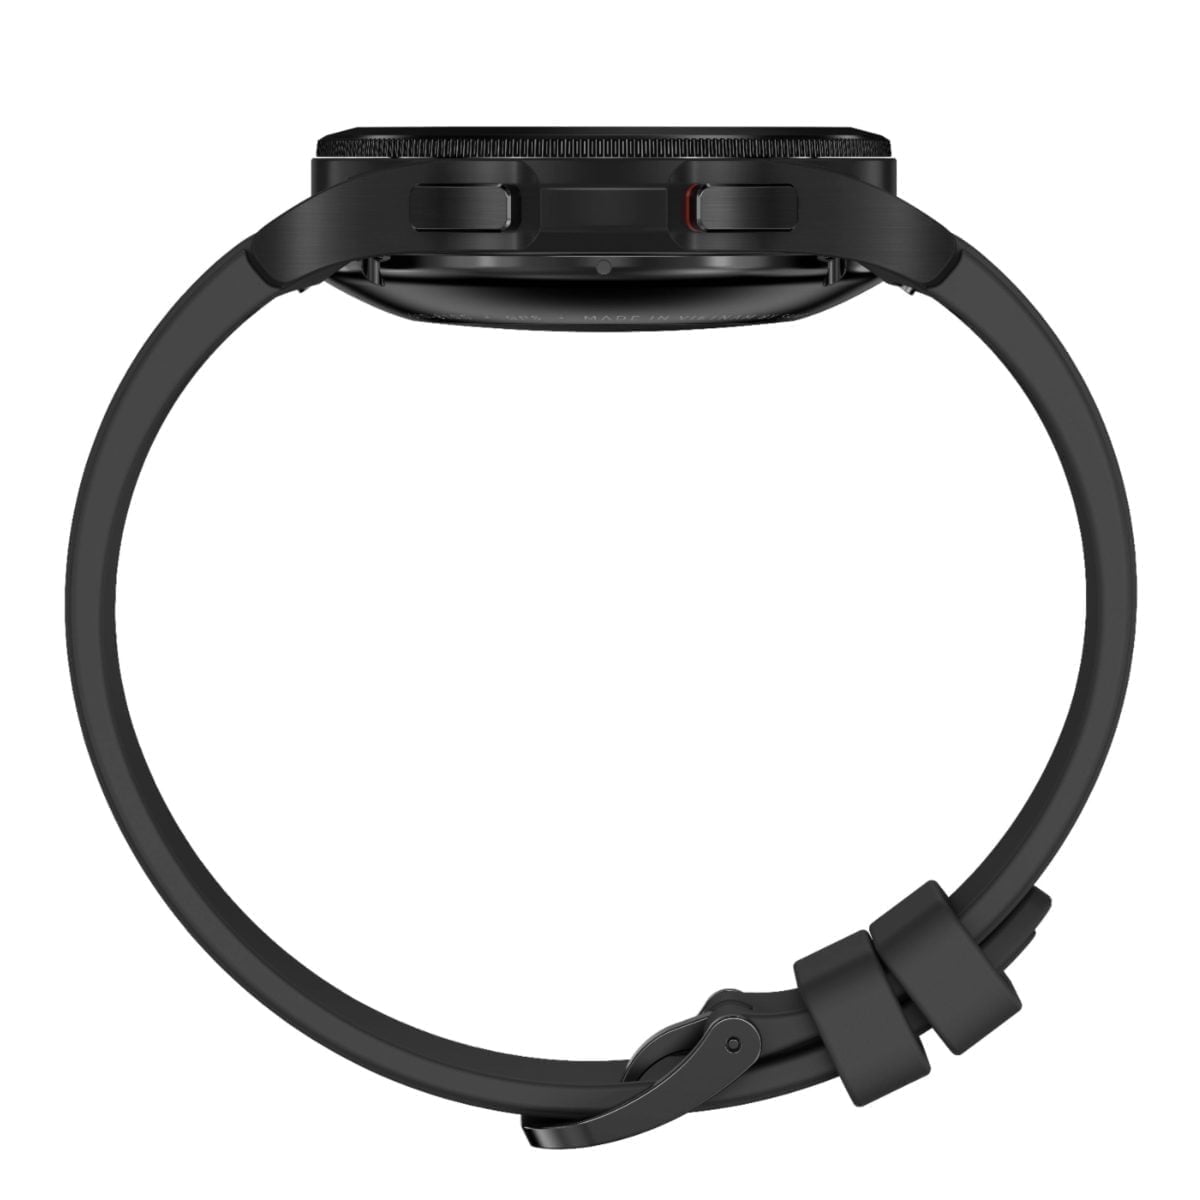 6464595Cv14D Scaled Samsung &Lt;Div Class=&Quot;Sku-Title&Quot;&Gt; &Lt;Div Class=&Quot;Sku-Title&Quot;&Gt; &Lt;H1 Class=&Quot;Heading-5 V-Fw-Regular&Quot;&Gt;Samsung - Galaxy Watch4 Classic Stainless Steel Smartwatch 46Mm Bt - Black &Lt;Strong&Gt;Model&Lt;/Strong&Gt;:&Lt;Span Class=&Quot;Product-Data-Value Body-Copy&Quot; Style=&Quot;Color: #333333; Font-Size: 16Px;&Quot;&Gt;Sm-R890Nzkaxaa&Lt;/Span&Gt;&Lt;/H1&Gt; &Lt;/Div&Gt; Https://Www.youtube.com/Watch?V=Plte1N8Pl90 &Lt;/Div&Gt; &Lt;Div Class=&Quot;Title-Data Lv &Quot;&Gt; &Lt;Div Class=&Quot;Embedded-Component-Container Lv Product-Description&Quot;&Gt; &Lt;Div Id=&Quot;Shop-Product-Description-93715662&Quot; Class=&Quot;None&Quot; Data-Version=&Quot;1.3.38&Quot;&Gt; &Lt;Div Class=&Quot;Shop-Product-Description&Quot;&Gt;&Lt;Section Class=&Quot;Align-Heading-Left&Quot; Data-Reactroot=&Quot;&Quot;&Gt; &Lt;Div Class=&Quot;Long-Description-Container Body-Copy &Quot;&Gt; &Lt;Div Class=&Quot;Html-Fragment&Quot;&Gt; &Lt;Div&Gt;Your Style. Your Health. Look Good And Feel Great With Your Smart, New Companion, Samsung Galaxy Watch 4 Classic. Make A Stylish Statement With An Iconic Silhouette And Stainless-Steel Casing, While Your Watch Keeps You In Tune With Your Health And Pushes You To Go Further. Make The Most Of Every Run With Advanced Coaching And Oxygen-Level Monitoring¹ That Help You Exercise Smarter While Increasing Endurance. Leave Your Phone Behind While Staying Connected — Call, Text And Stream Music,All From Your Wrist With Lte Connectivity. Galaxy Watch4 Classic Is Health Evolved. 1Accurate Vo2 Max Reading Requires Running Outdoors For At Least 20 Minutes With Gps On; Consult User Manual Before Use. ¹The Vo2 Max Software Functions Are Not Intended For Use In The Diagnosis Of Disease Or Other Conditions, Or In The Cure, Mitigation, Treatment Or Prevention Of Disease.&Lt;/Div&Gt; &Lt;Div&Gt;&Lt;/Div&Gt; &Lt;Div&Gt;&Lt;/Div&Gt; &Lt;/Div&Gt; &Lt;/Div&Gt; &Lt;/Section&Gt;&Lt;/Div&Gt; &Lt;/Div&Gt; &Lt;/Div&Gt; &Lt;/Div&Gt; Galaxy Watch4 Classic Samsung Galaxy Watch4 Classic Stainless Steel Smartwatch 46Mm Bt - Black